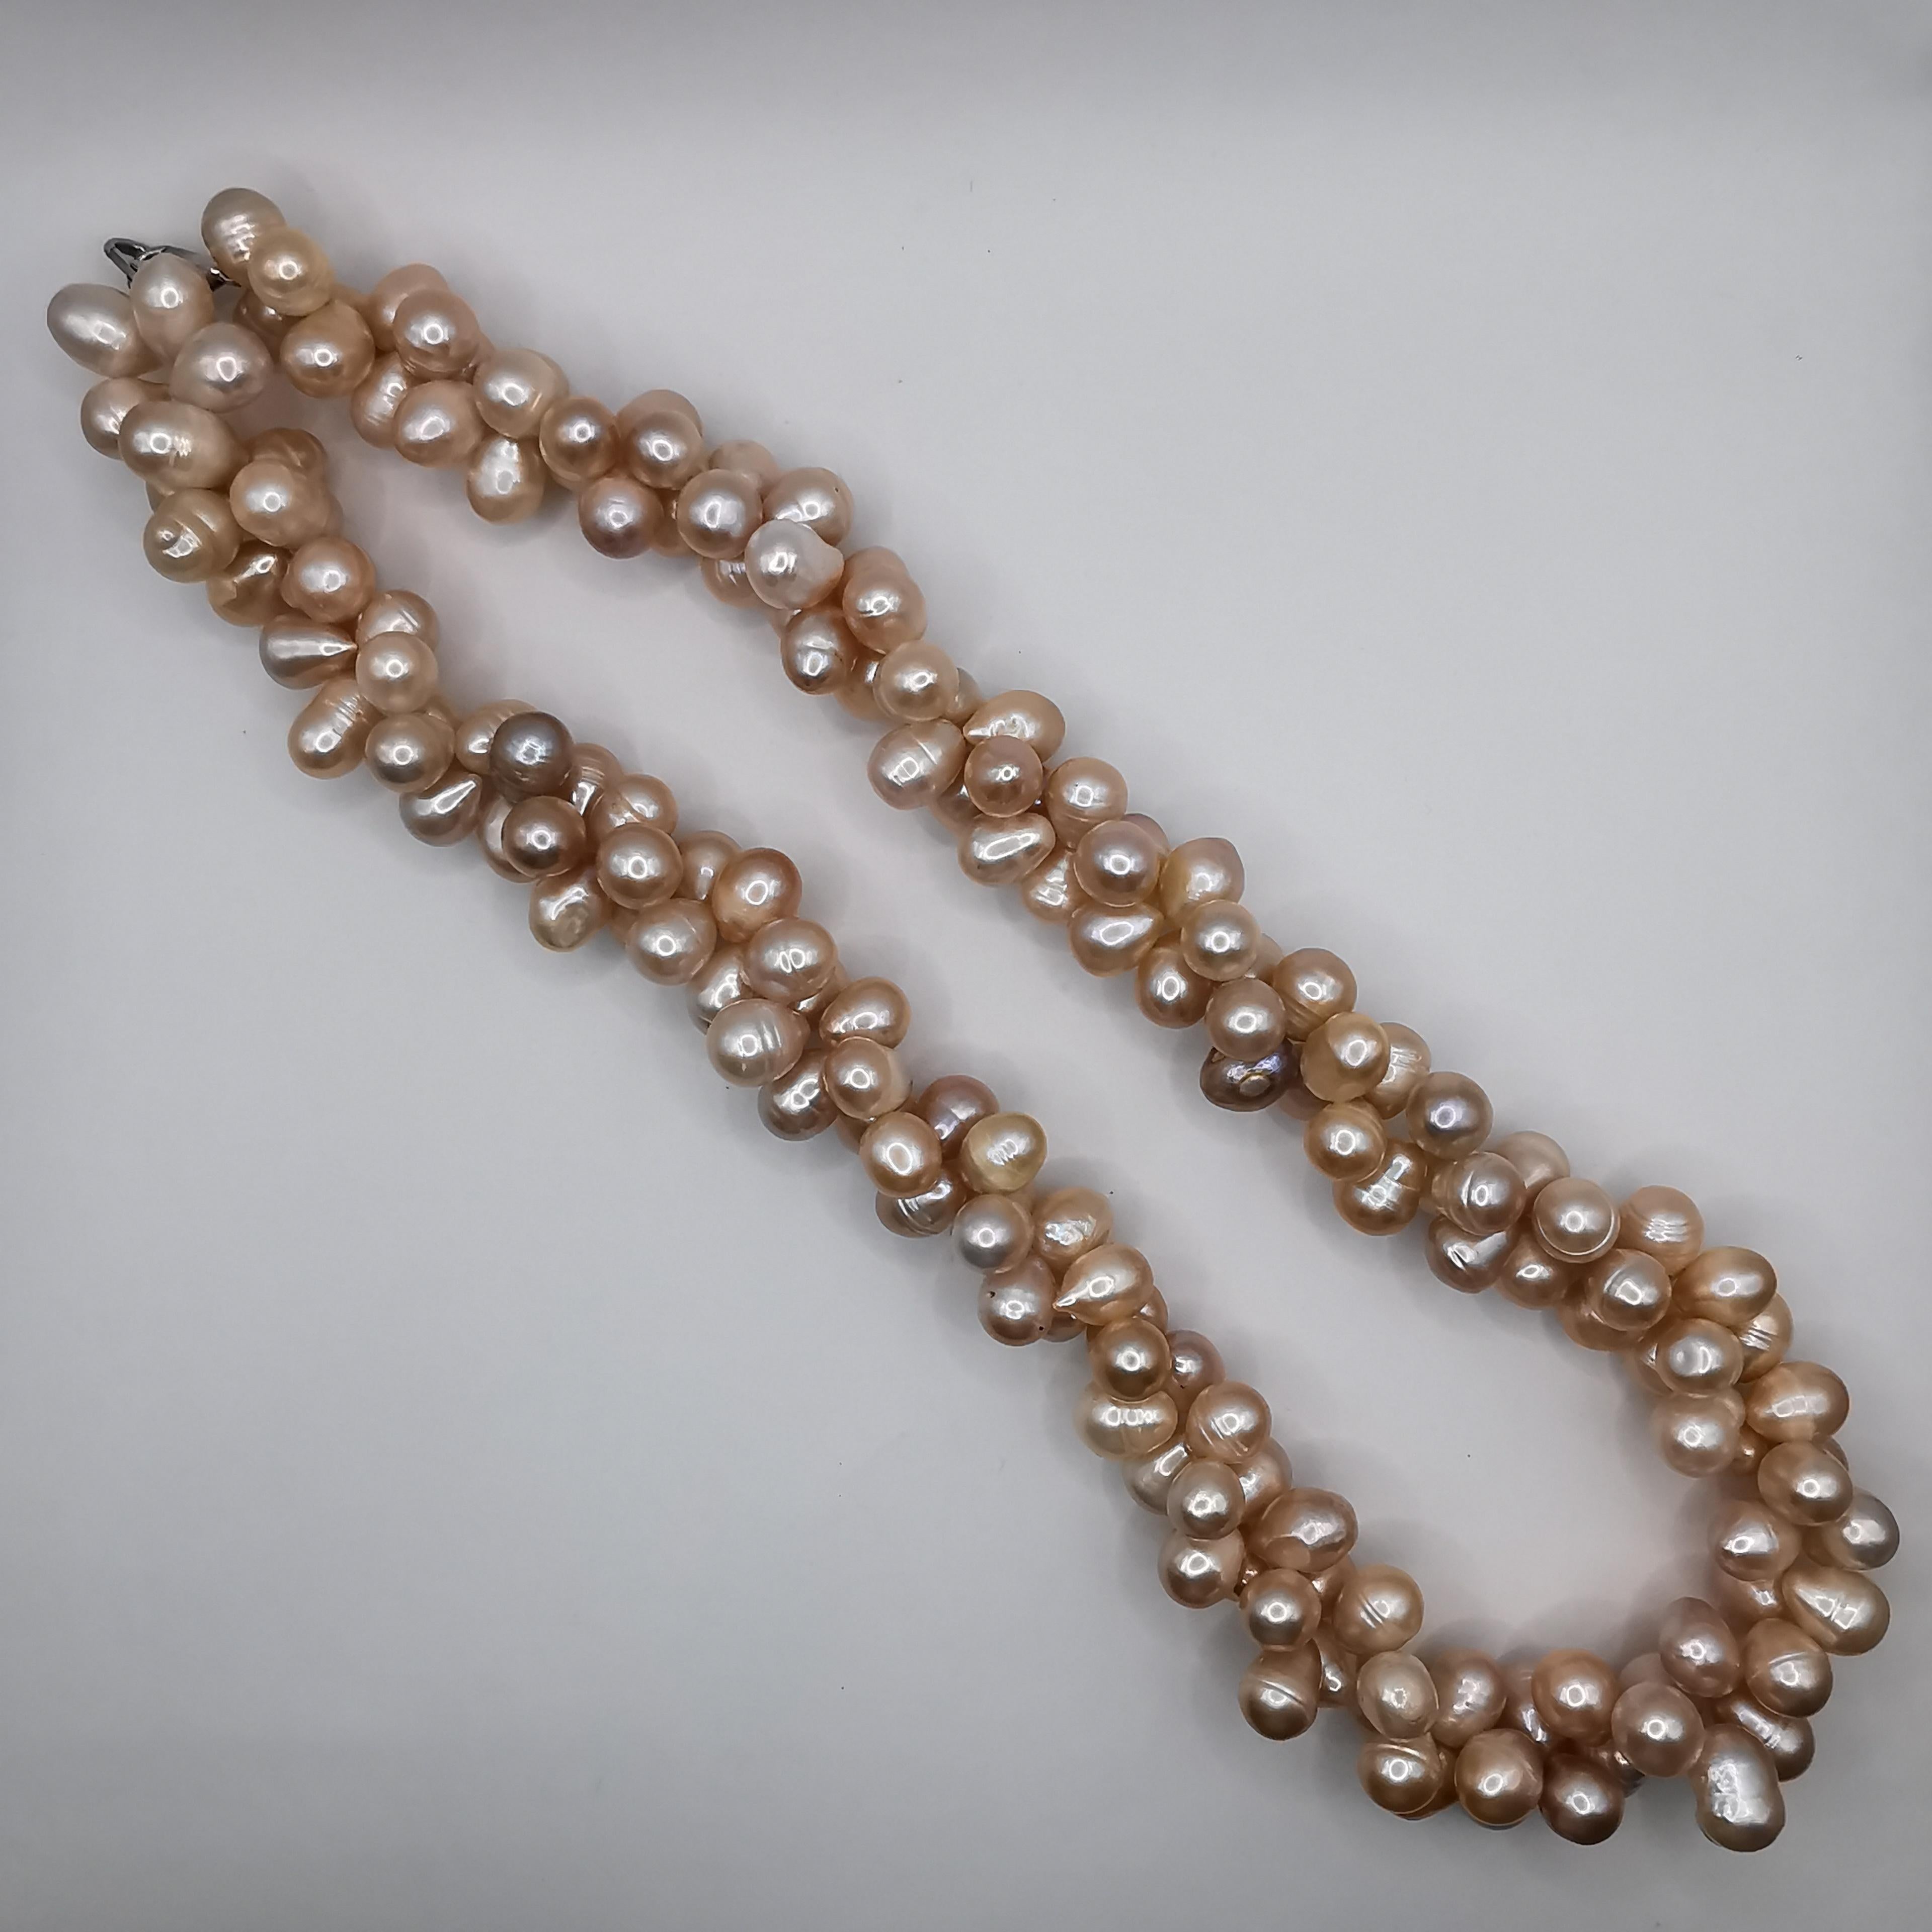 This dual twisted freshwater cultured baroque pink pearl necklace is a stunning and unique piece that is sure to catch the eye. The necklace features a beautifully twisted design, with two strands of freshwater cultured baroque pink pearls that come